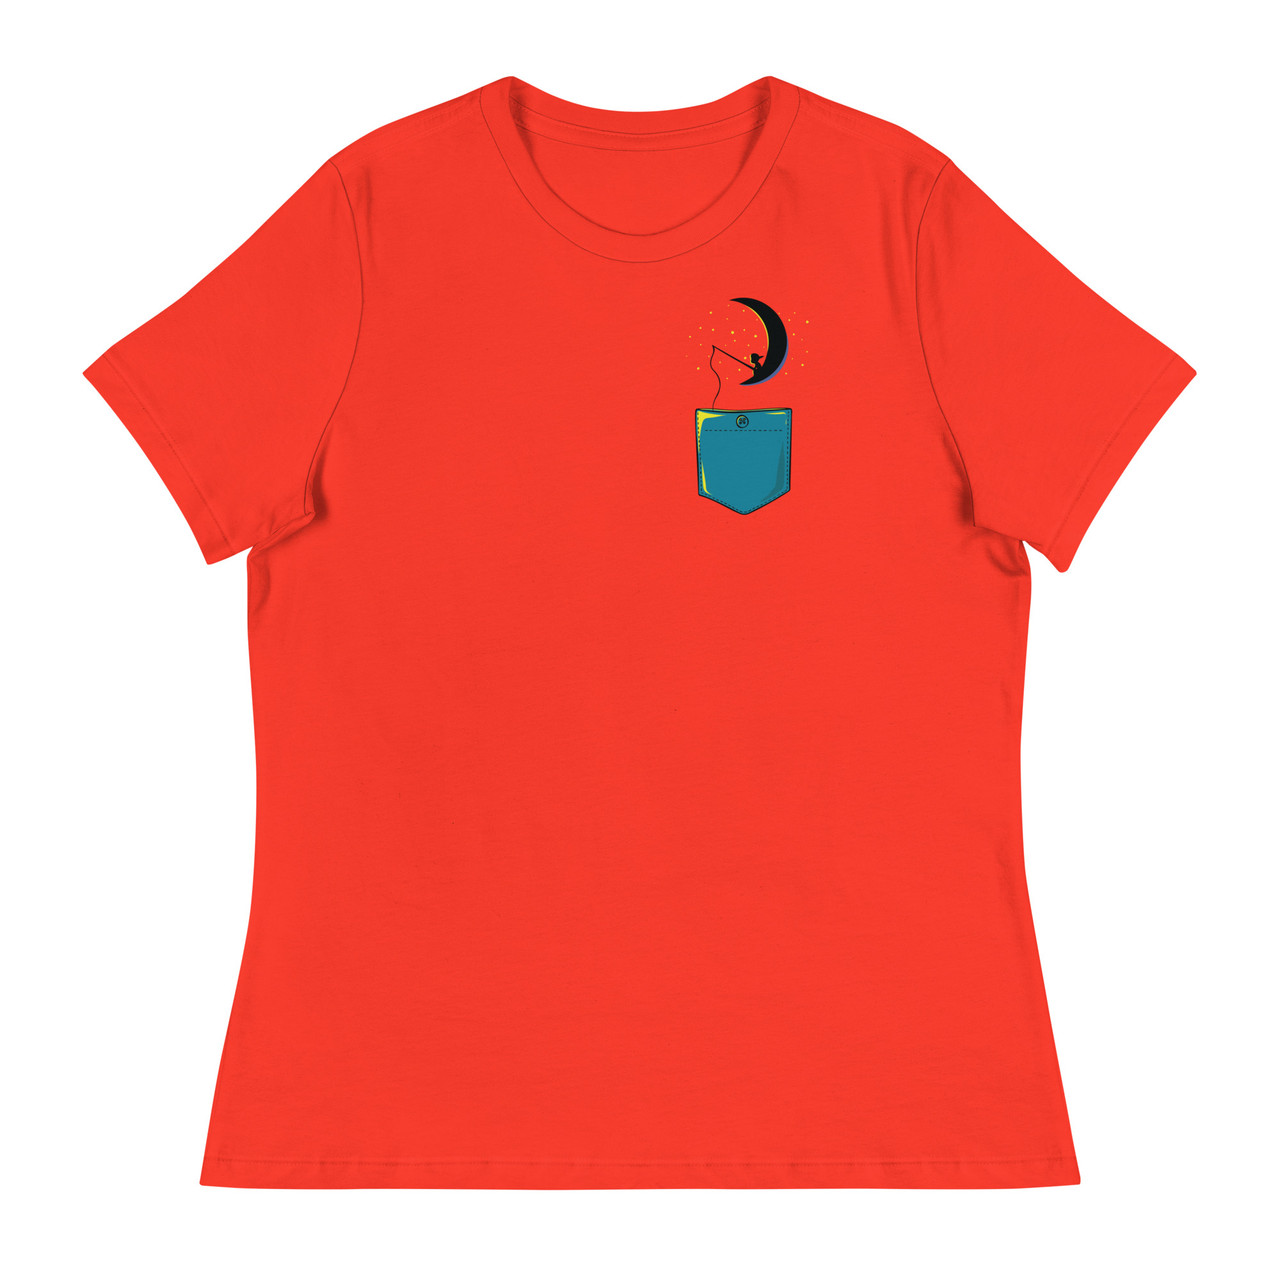 Child On Moon Pocket Women's Relaxed T-Shirt - Bella + Canvas 6400 